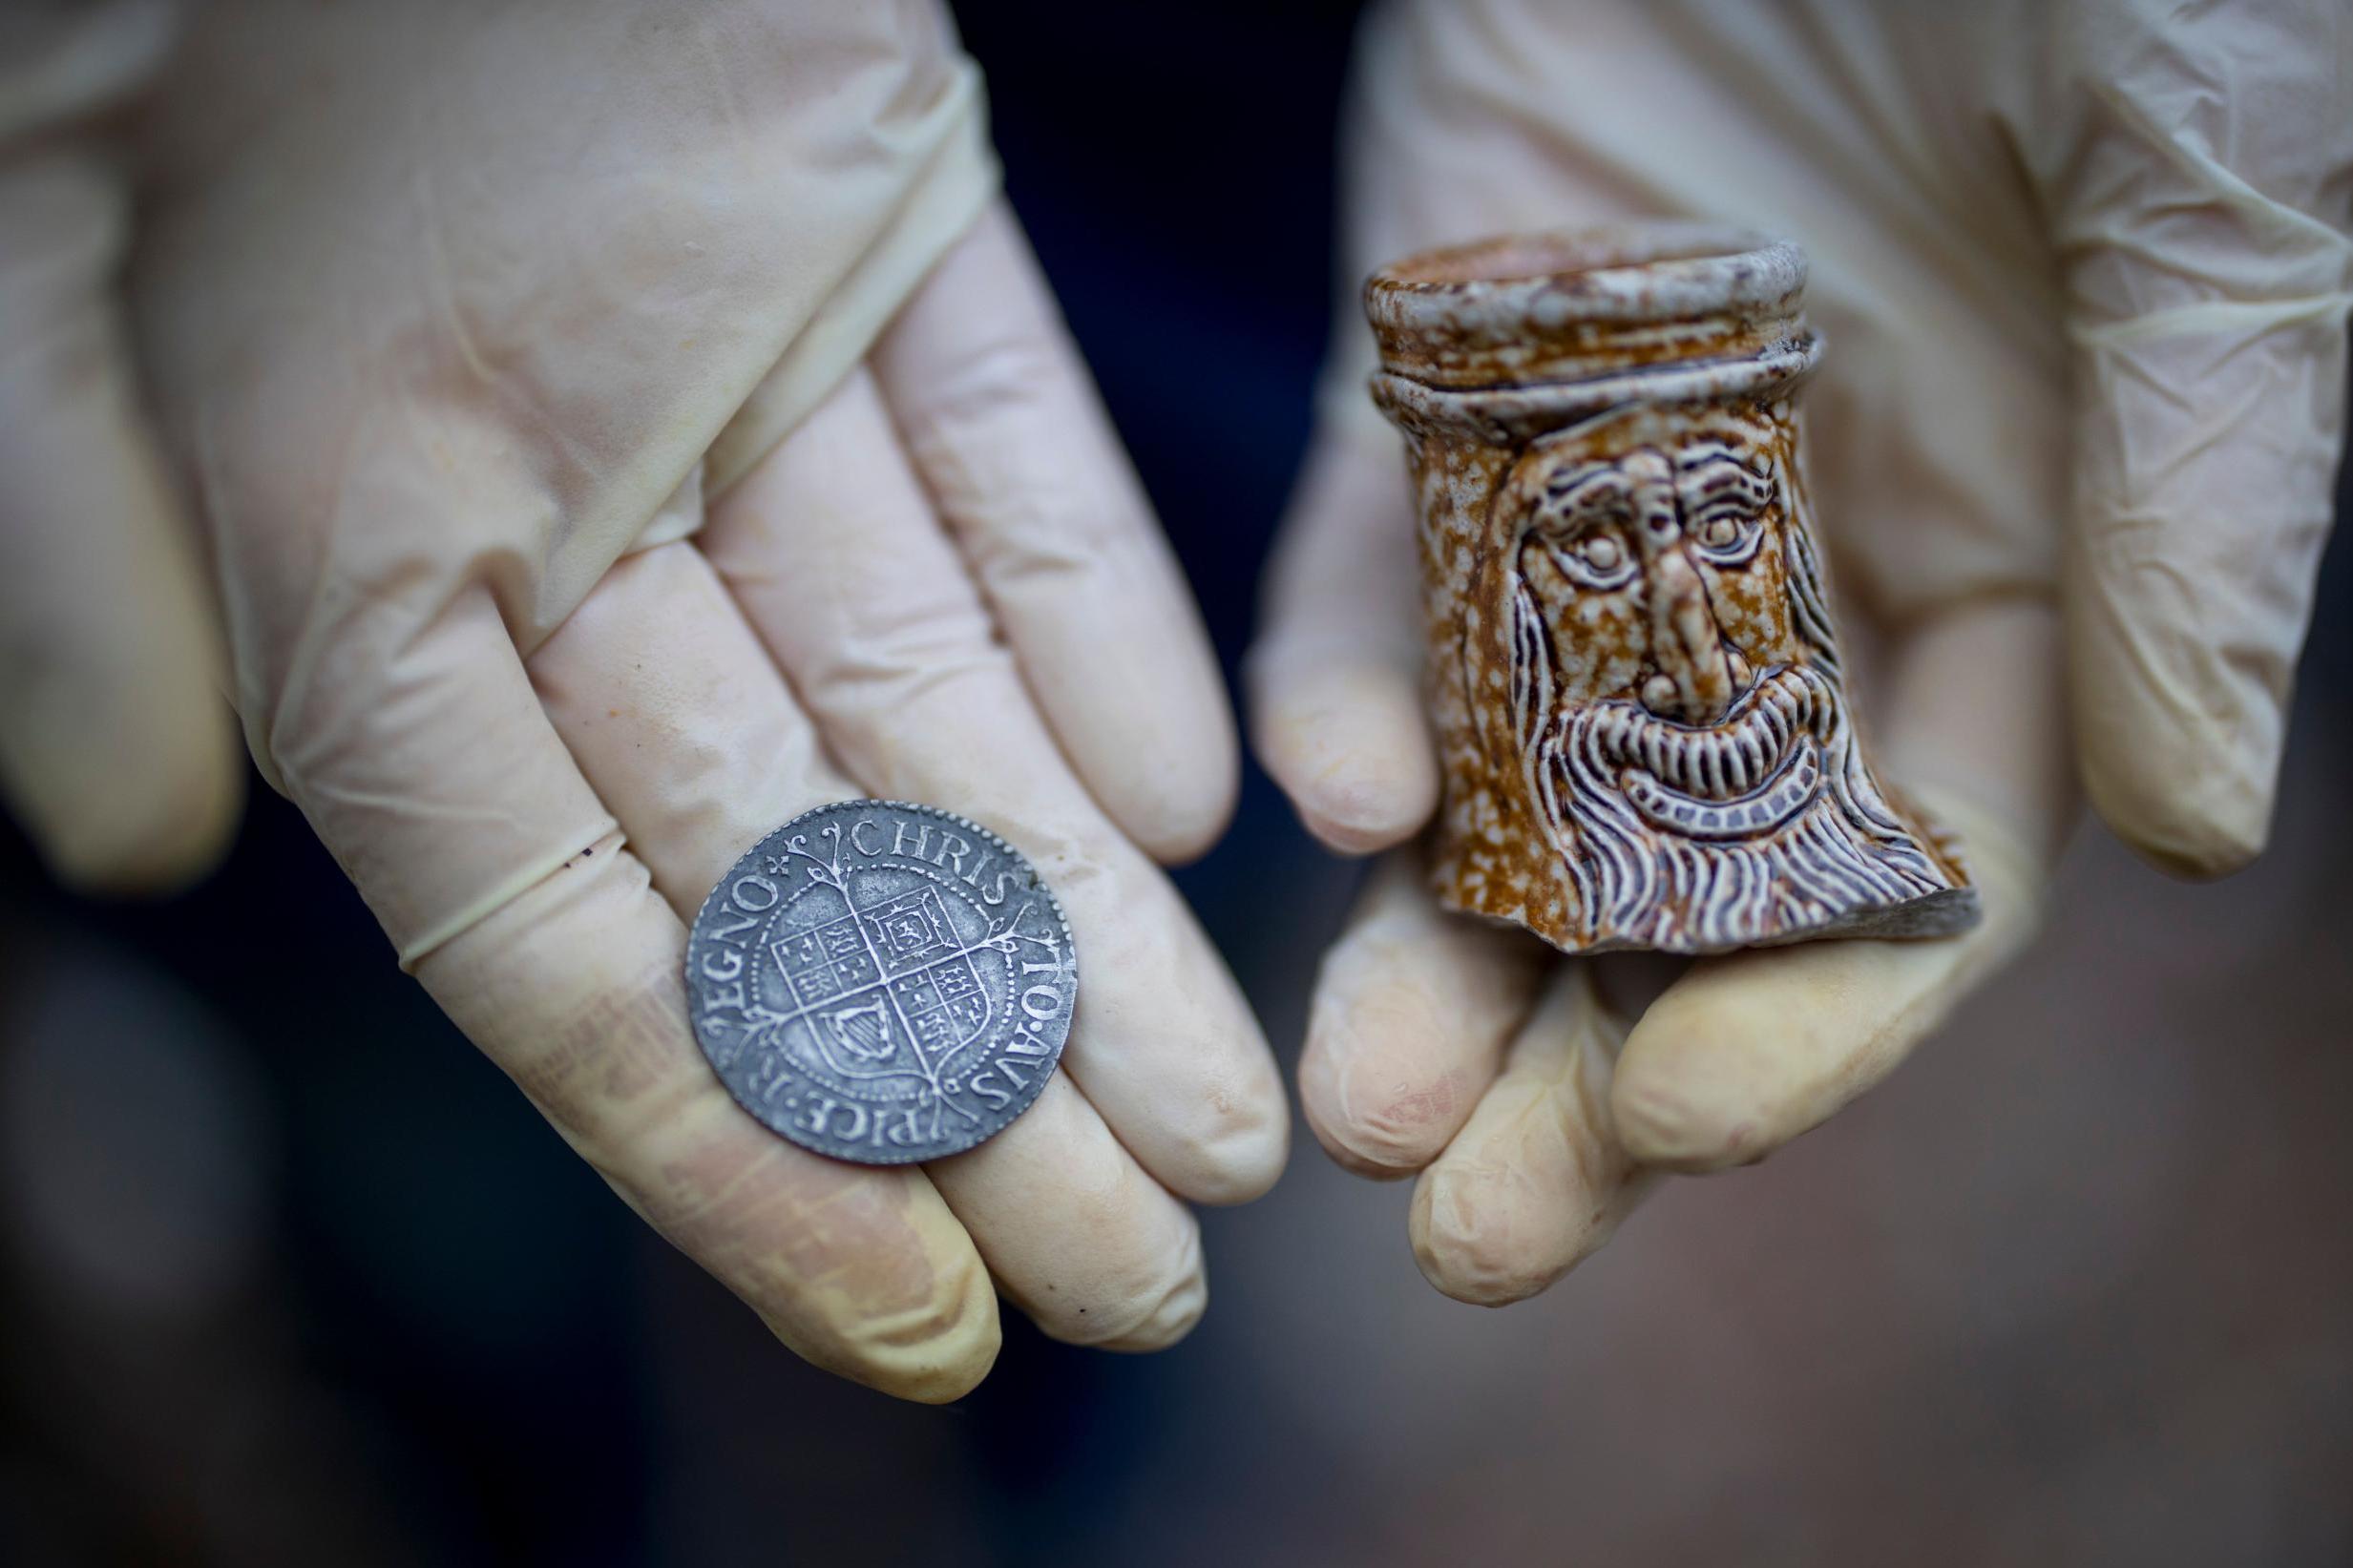 A 17th-century coin and part of a Bellarmine jug are just some of the day’s finds (AFP/Getty)